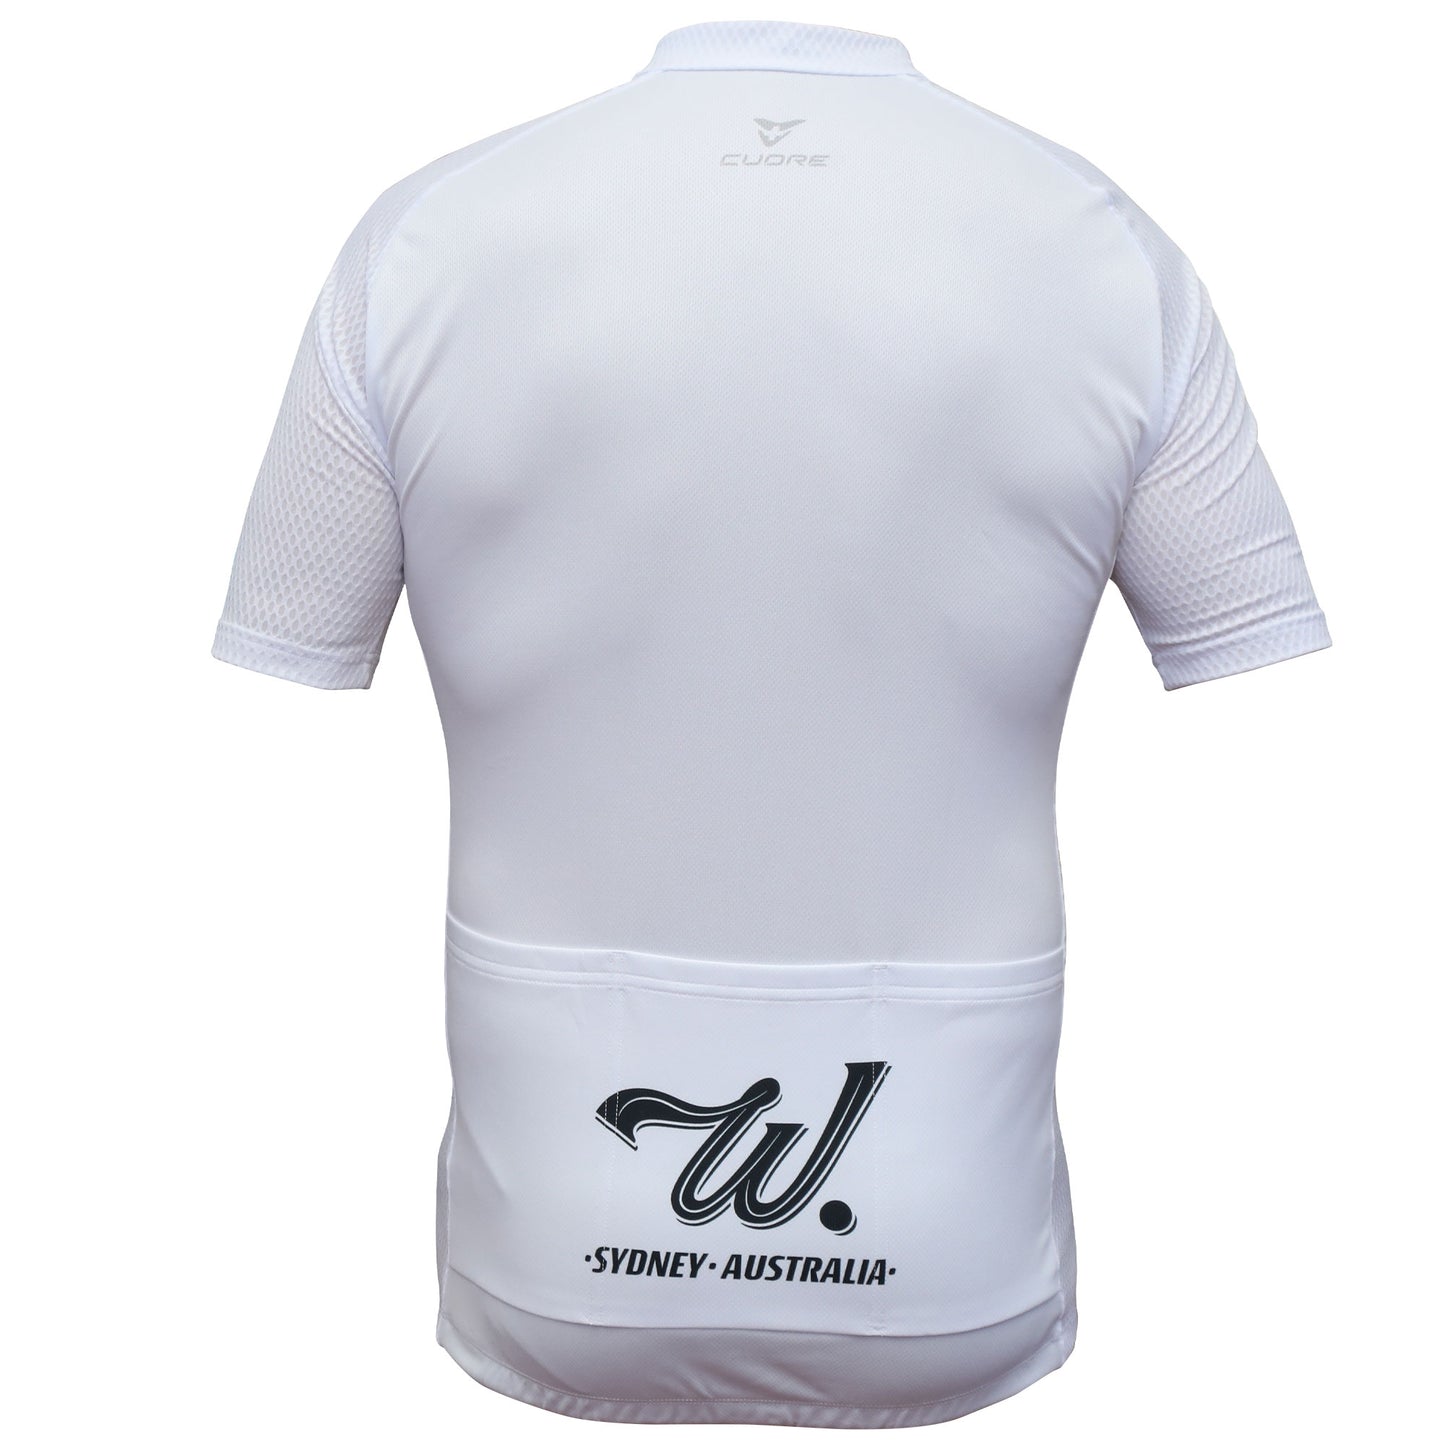 Wooly's Wheels Finisher Sport Jersey by Cuore of Switzerland, White